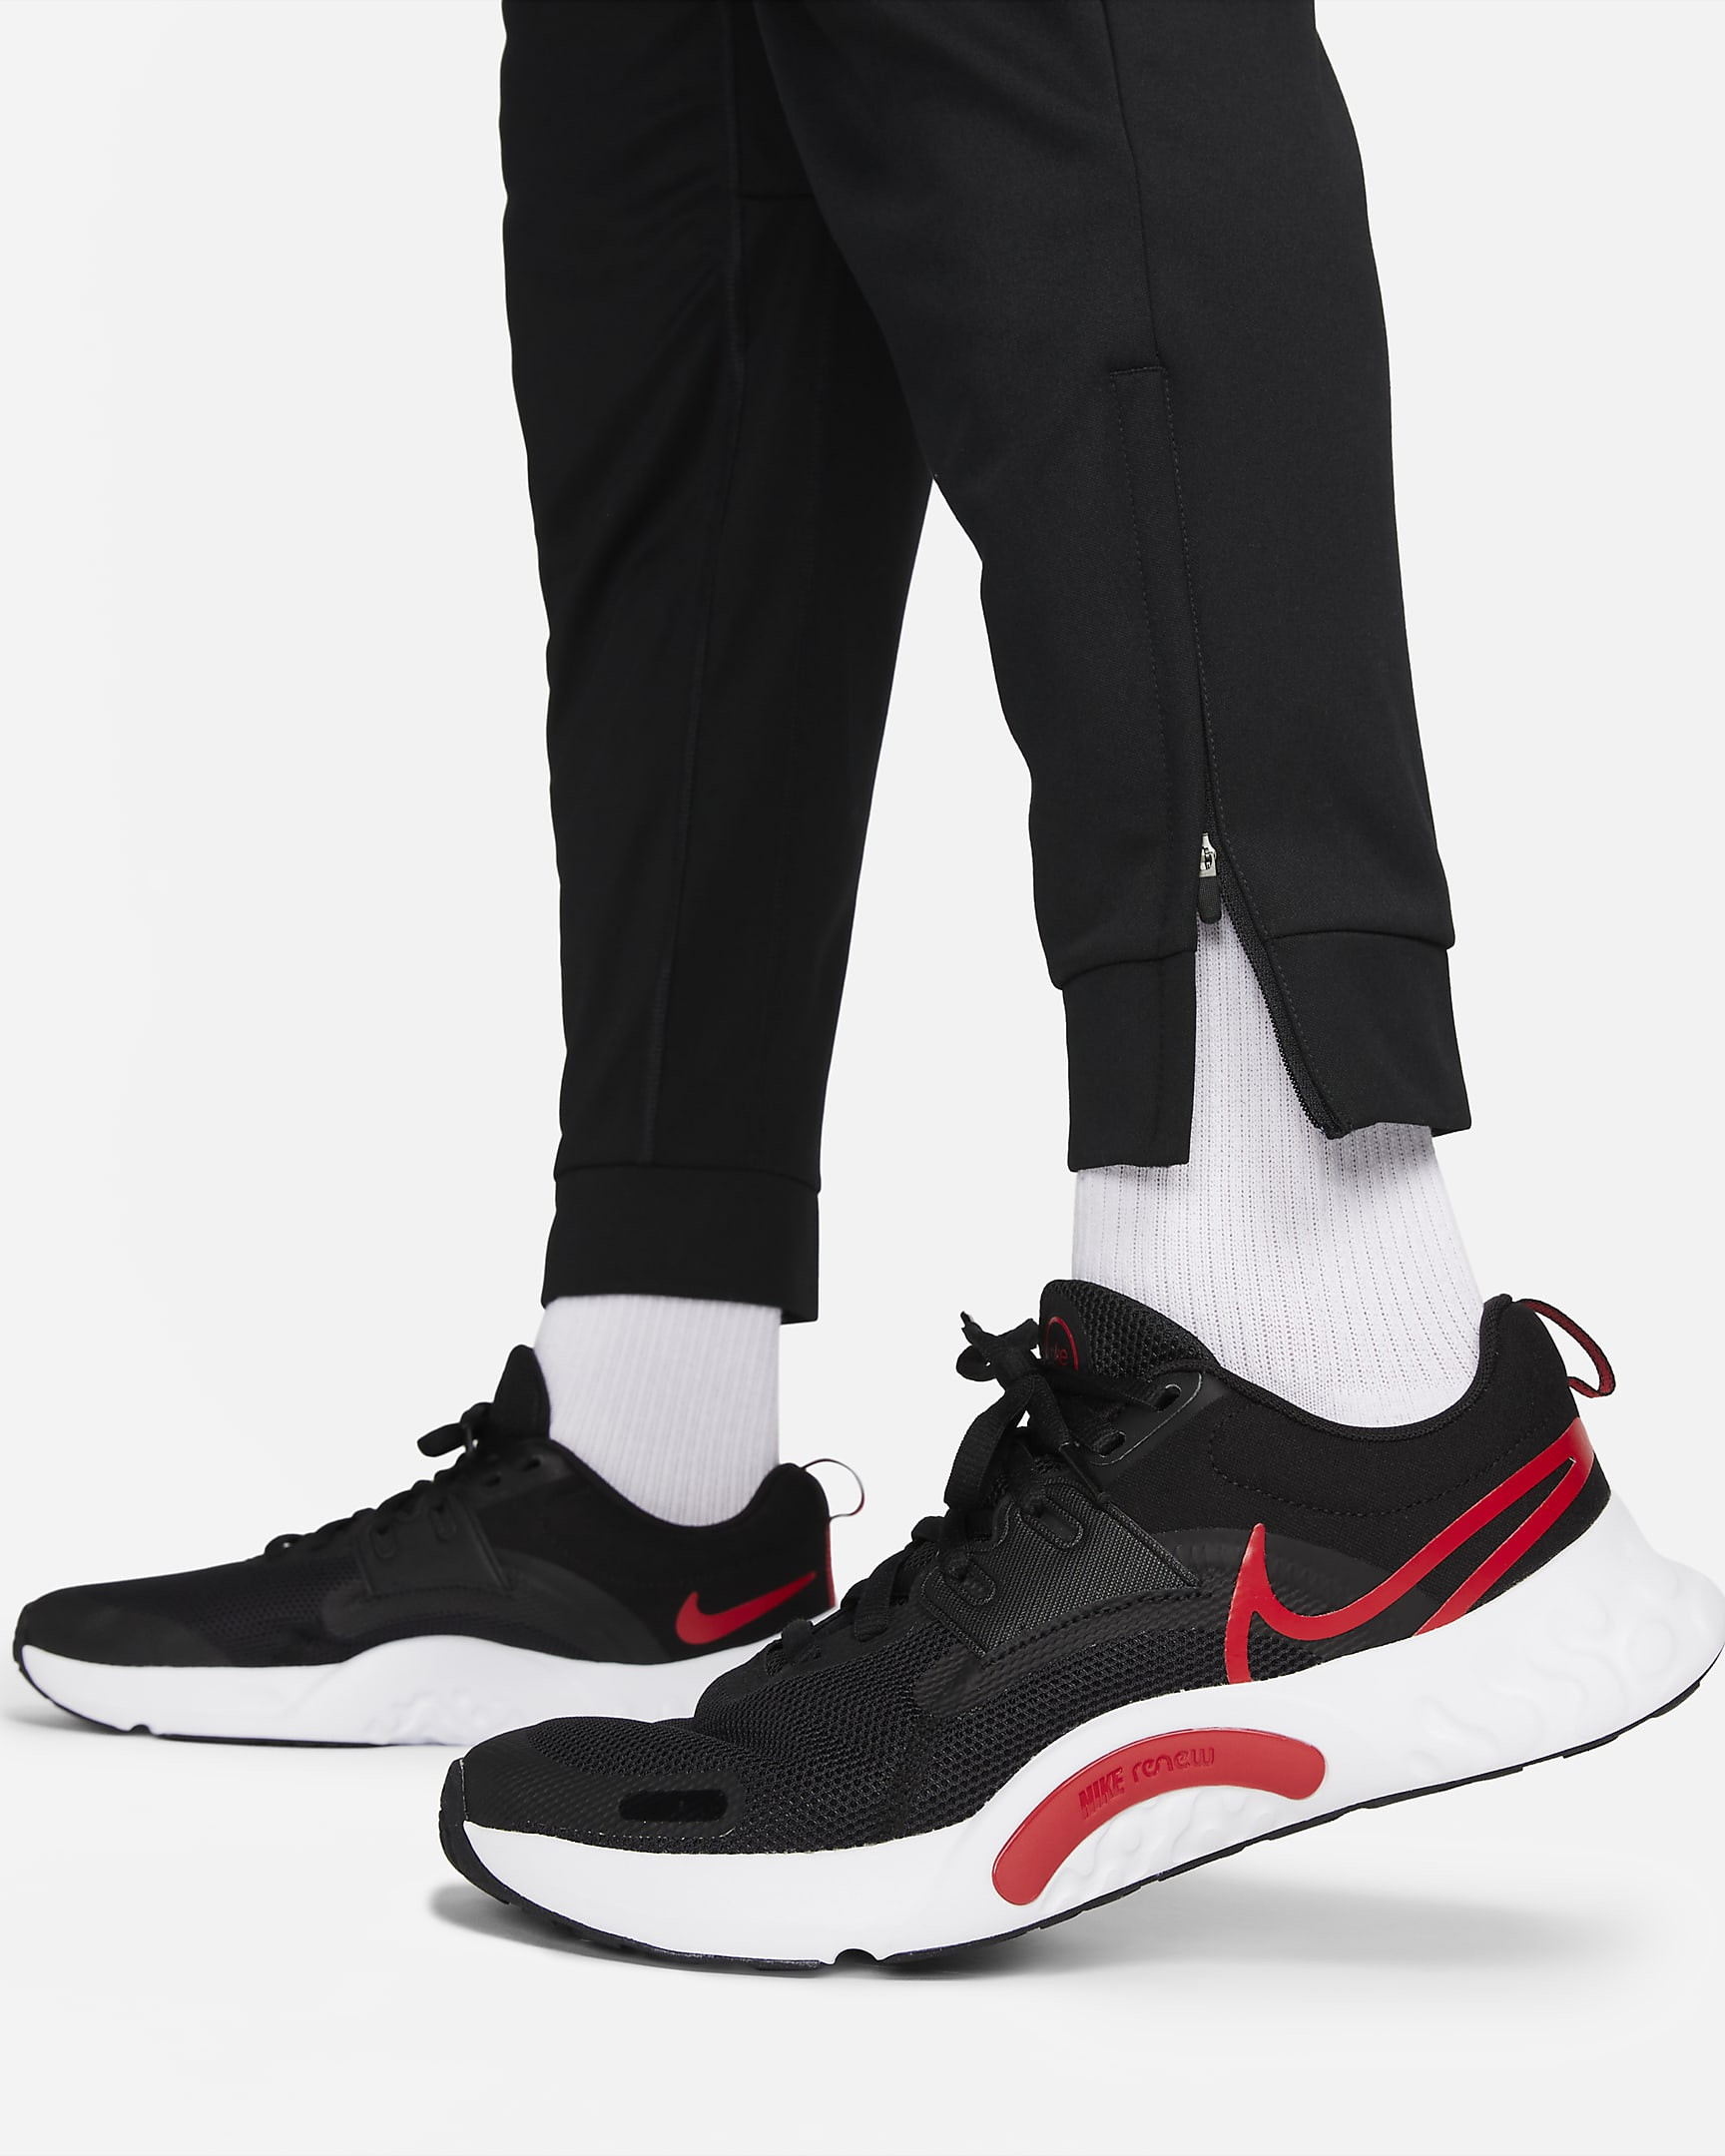 Штани Nike M NK DF TOTALITY PANT TPR FB7509-010